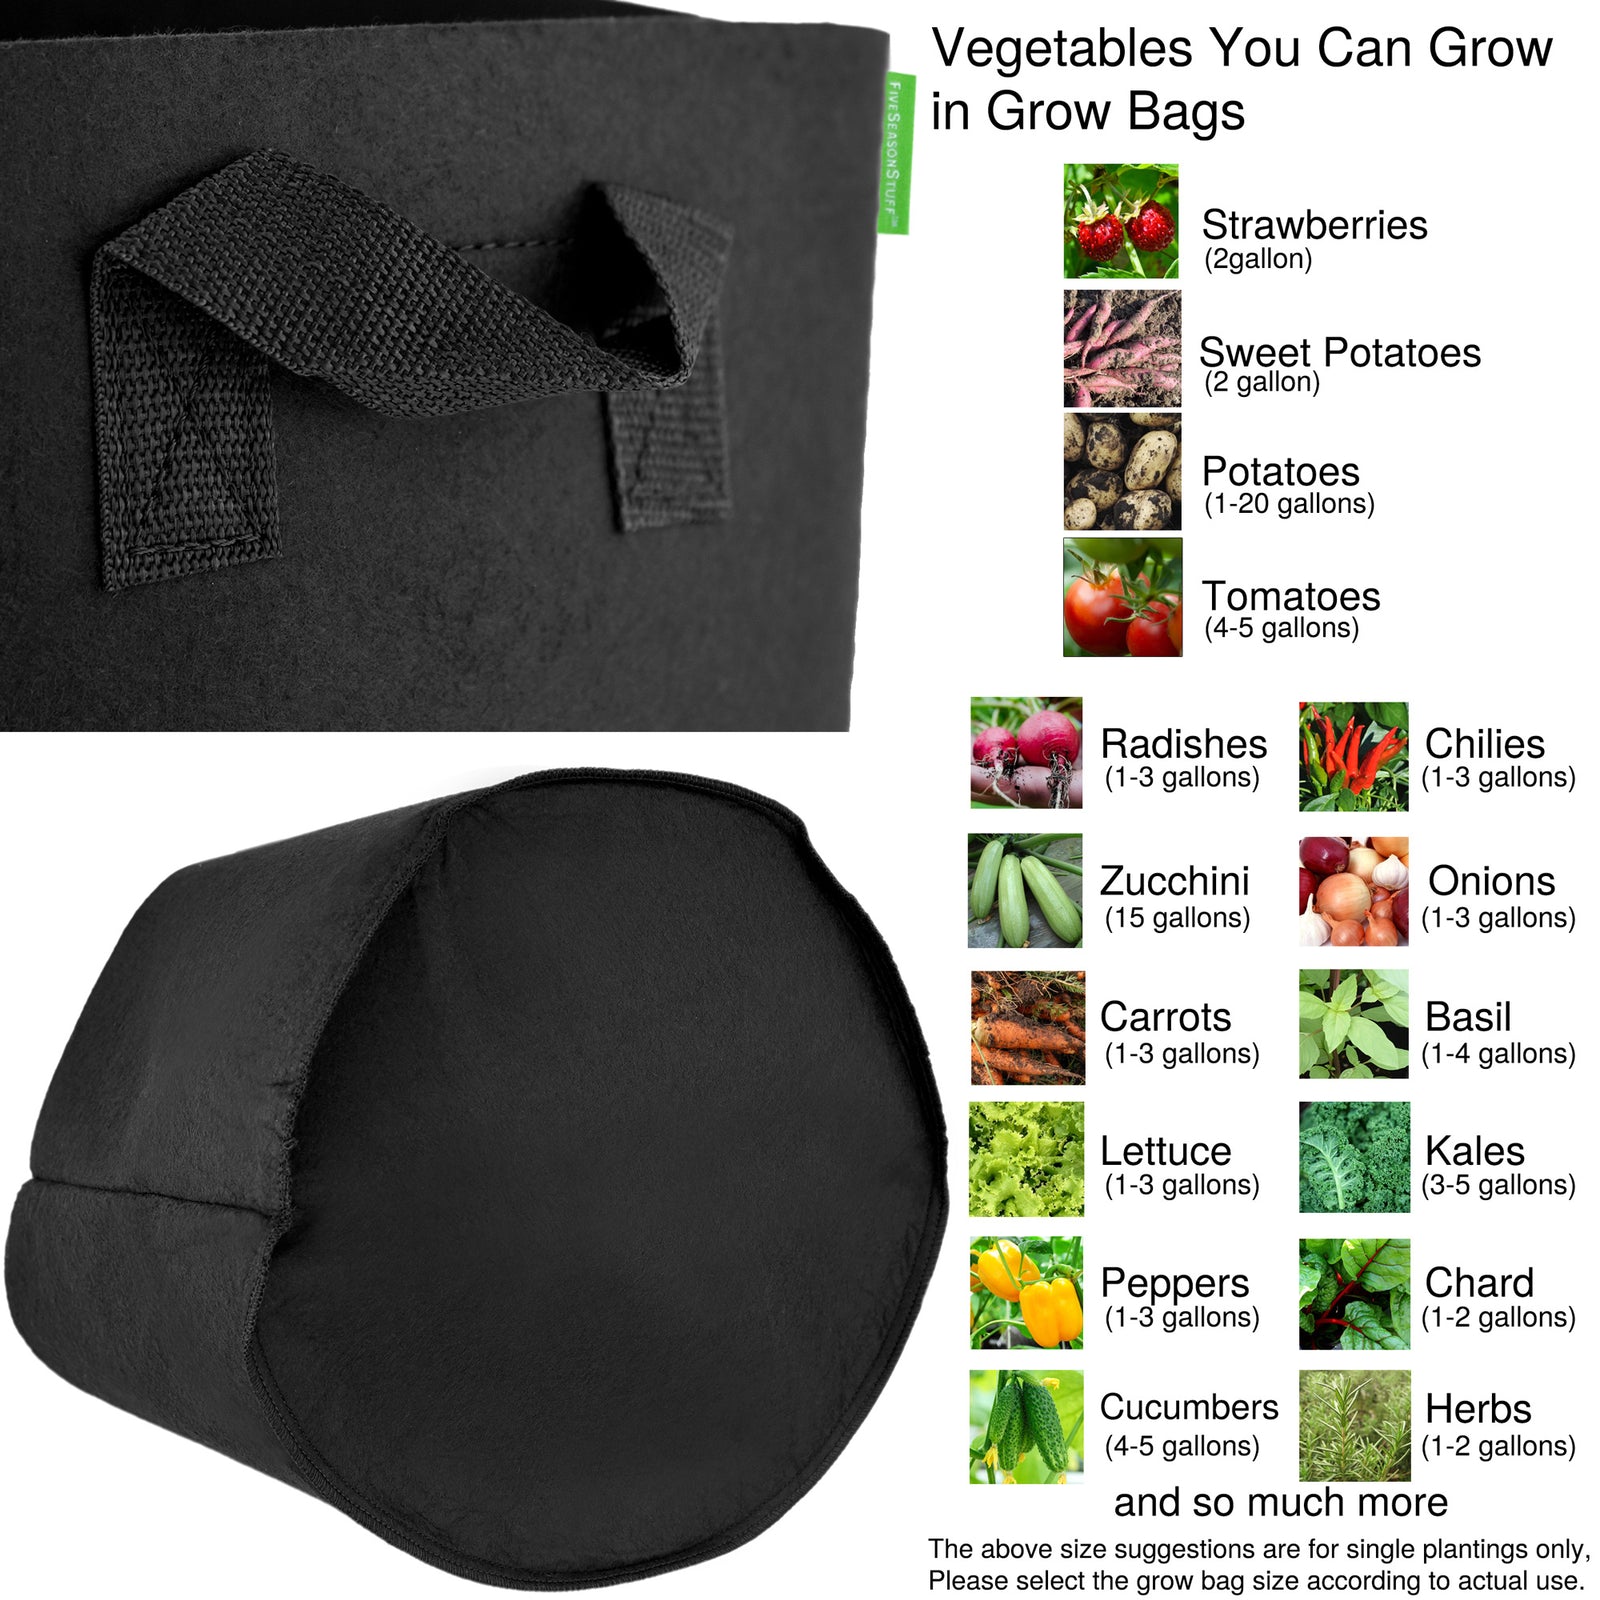 6 Pack 18 Gallons Grow Bags - Breathable Fabric Pots for Healthier Plants Vegetables Flowers – Heavy Duty Thick Containers with Sturdy Handles - Aeration Planters for Smart Gardening (Black)